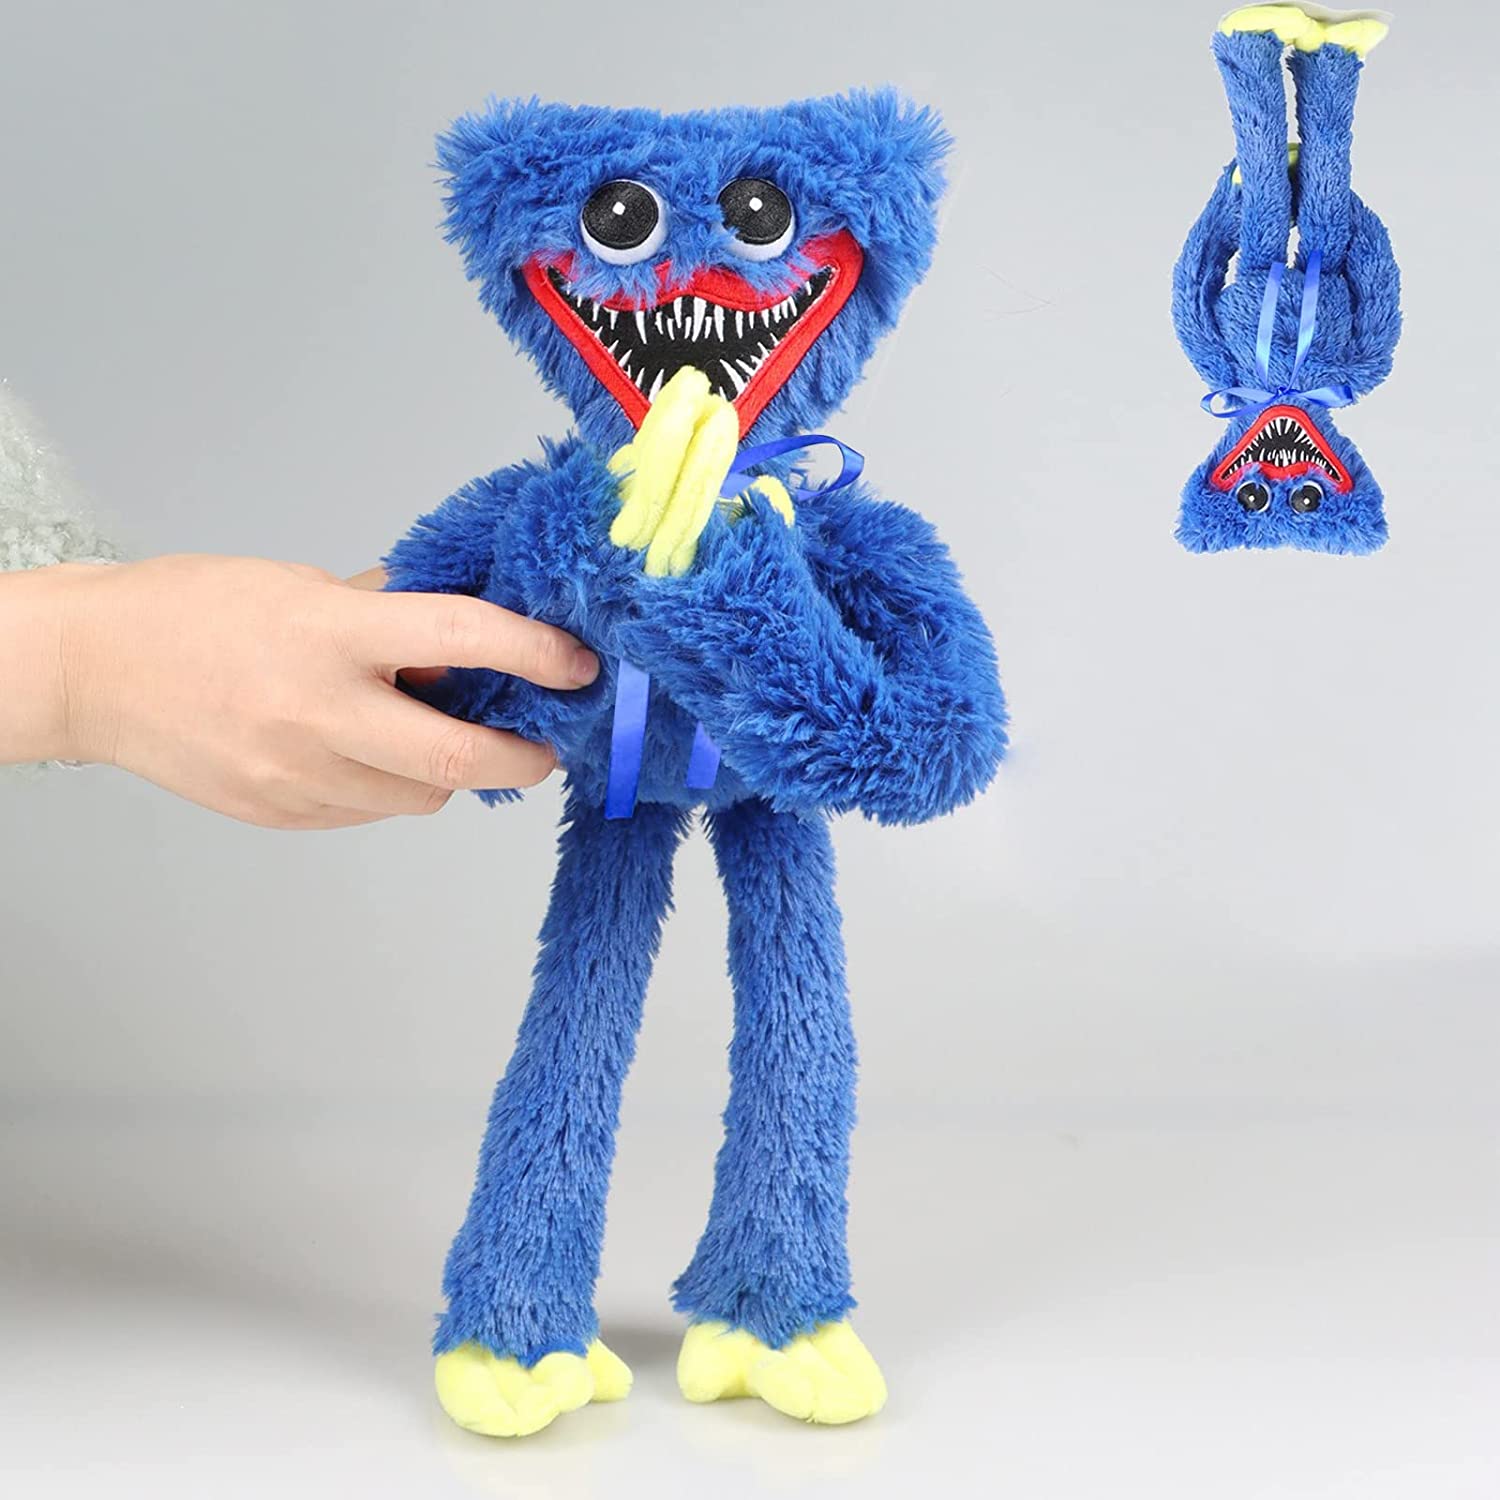 Aioco Huggy Wuggy Plush Doll, Poppy Playtime Huggy Wuggy Plush Toy, Blue Monster Horror Plush Monster Toy, Realistic Blue Sausage Monster Horror Christmas Stuffed Doll Gifts 1pcs, Everything Else